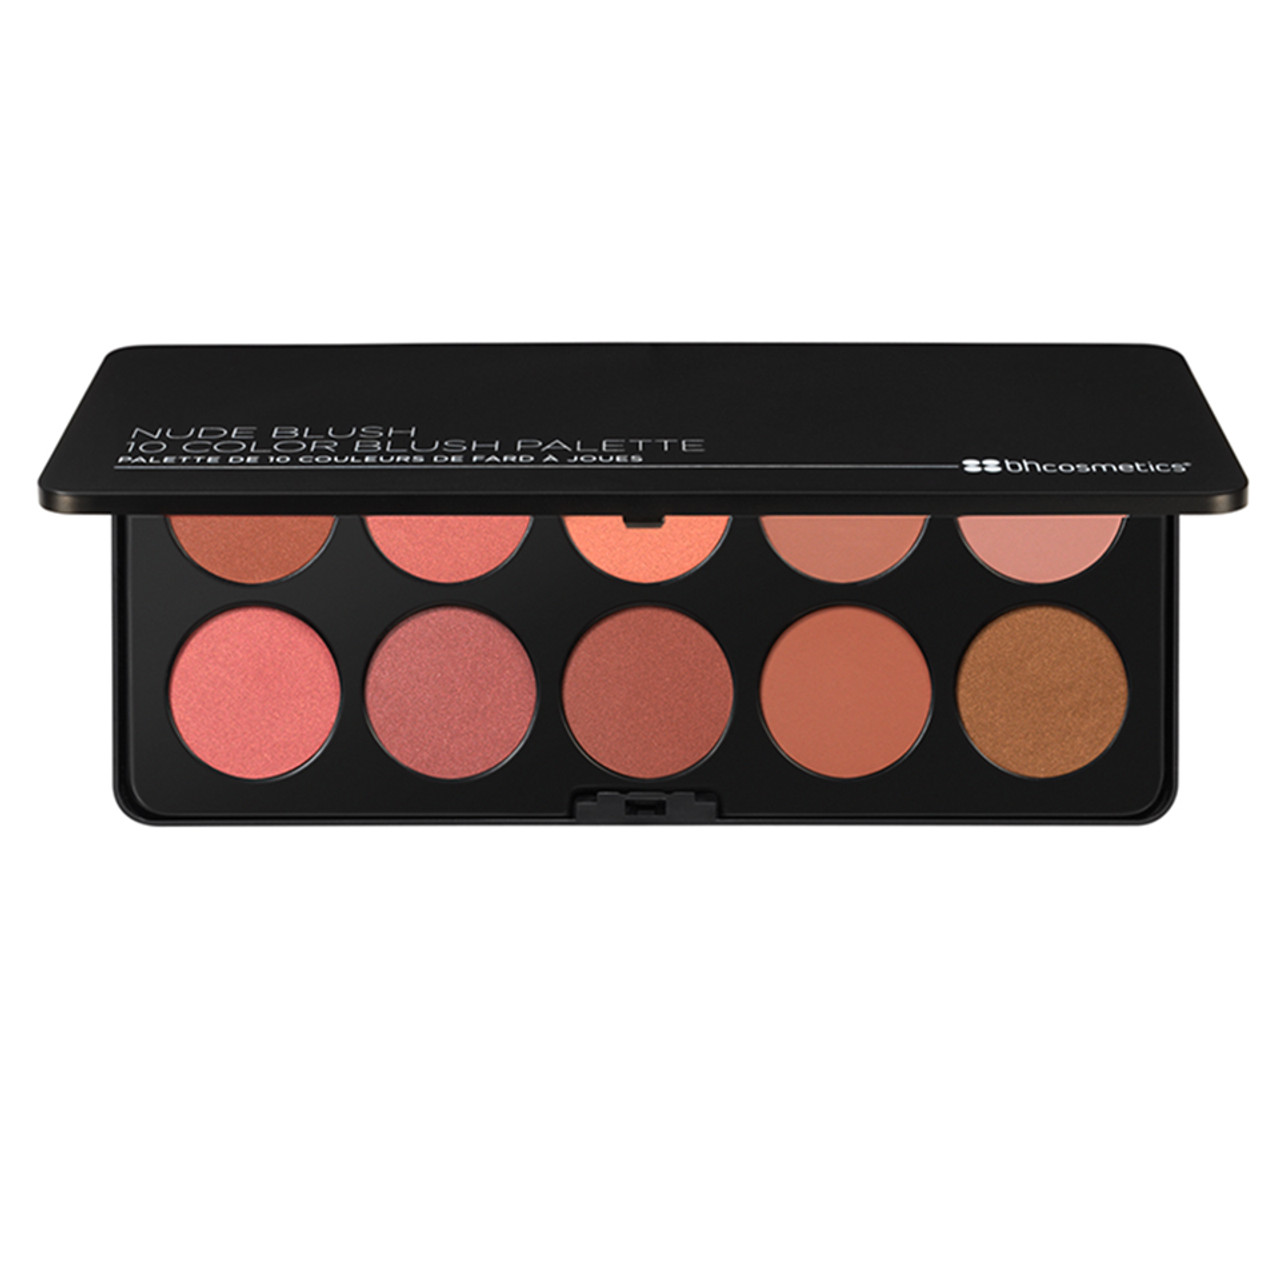 BH Cosmetics 10 Color Nude Blush Palette - YouTube